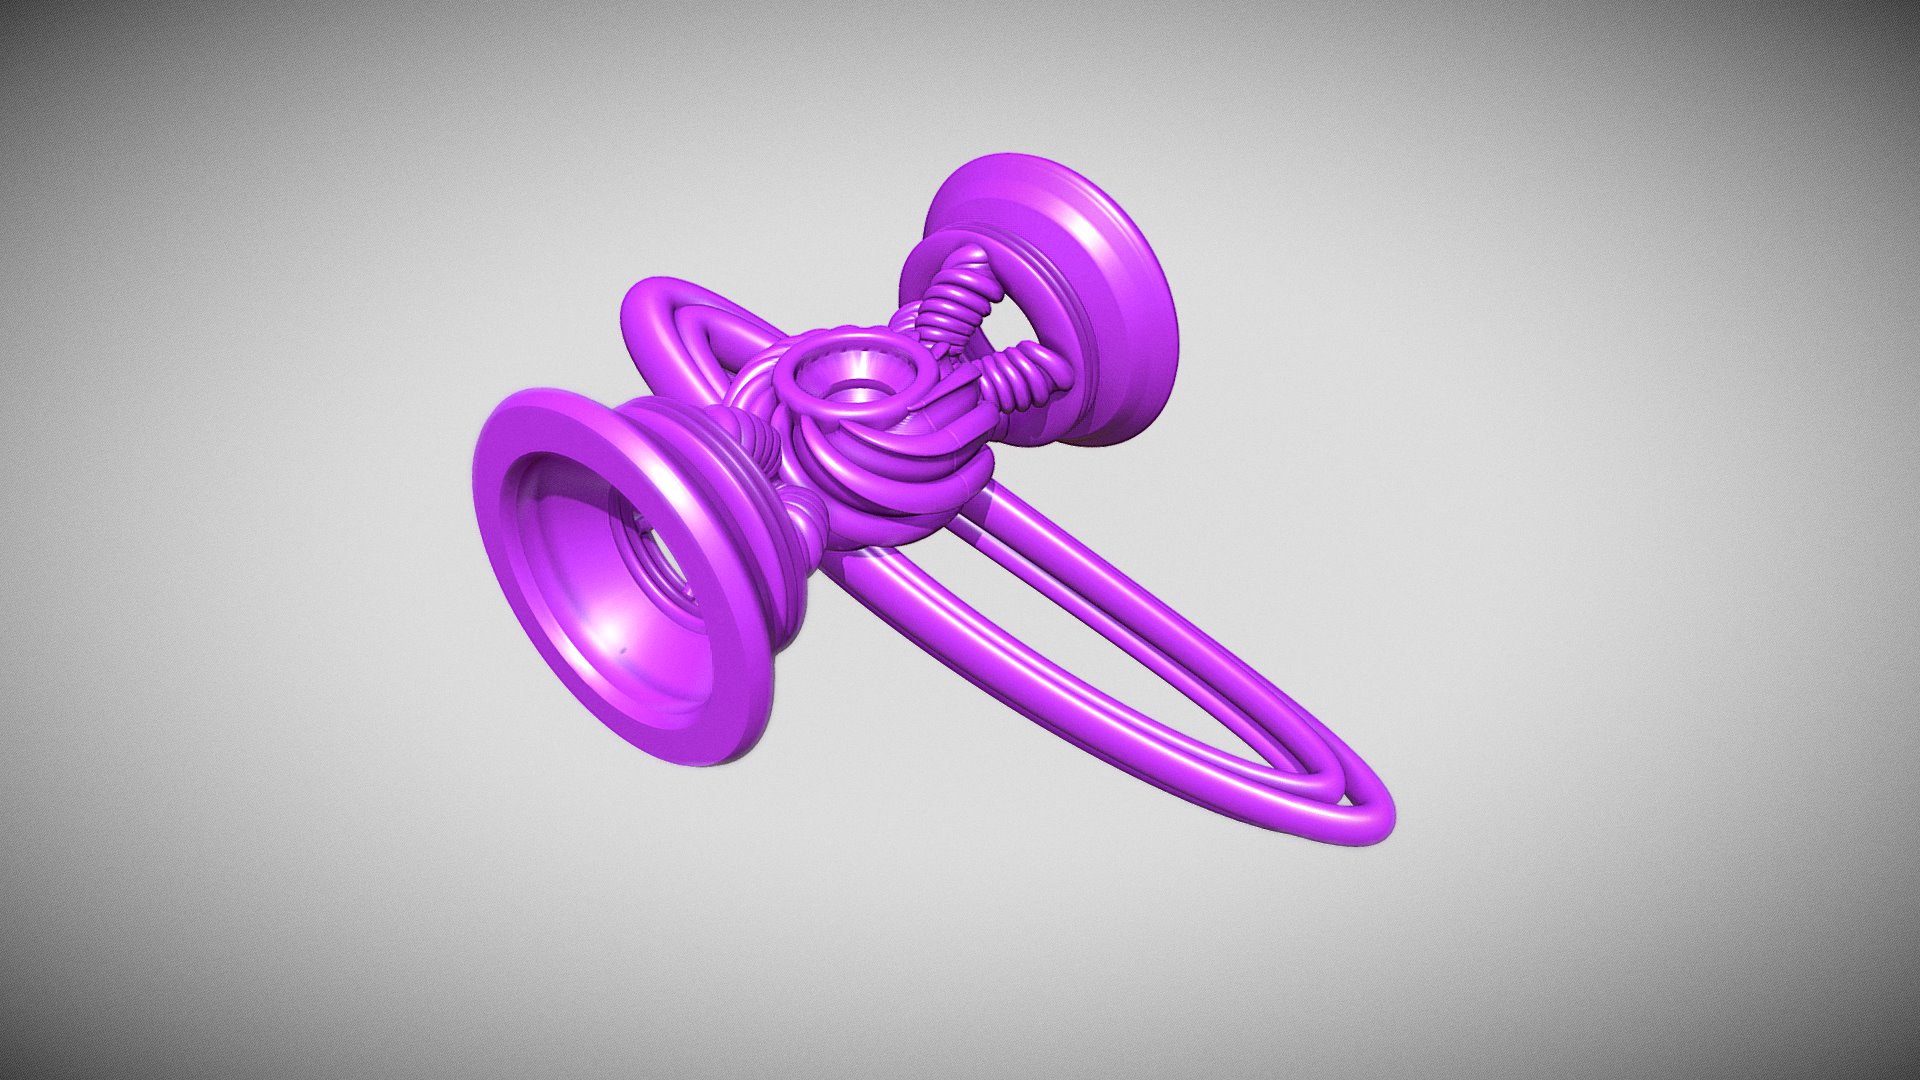 3D model Swishahouse chain link with 3 settings - This is a 3D model of the Swishahouse chain link with 3 settings. The 3D model is about a purple and white toy.